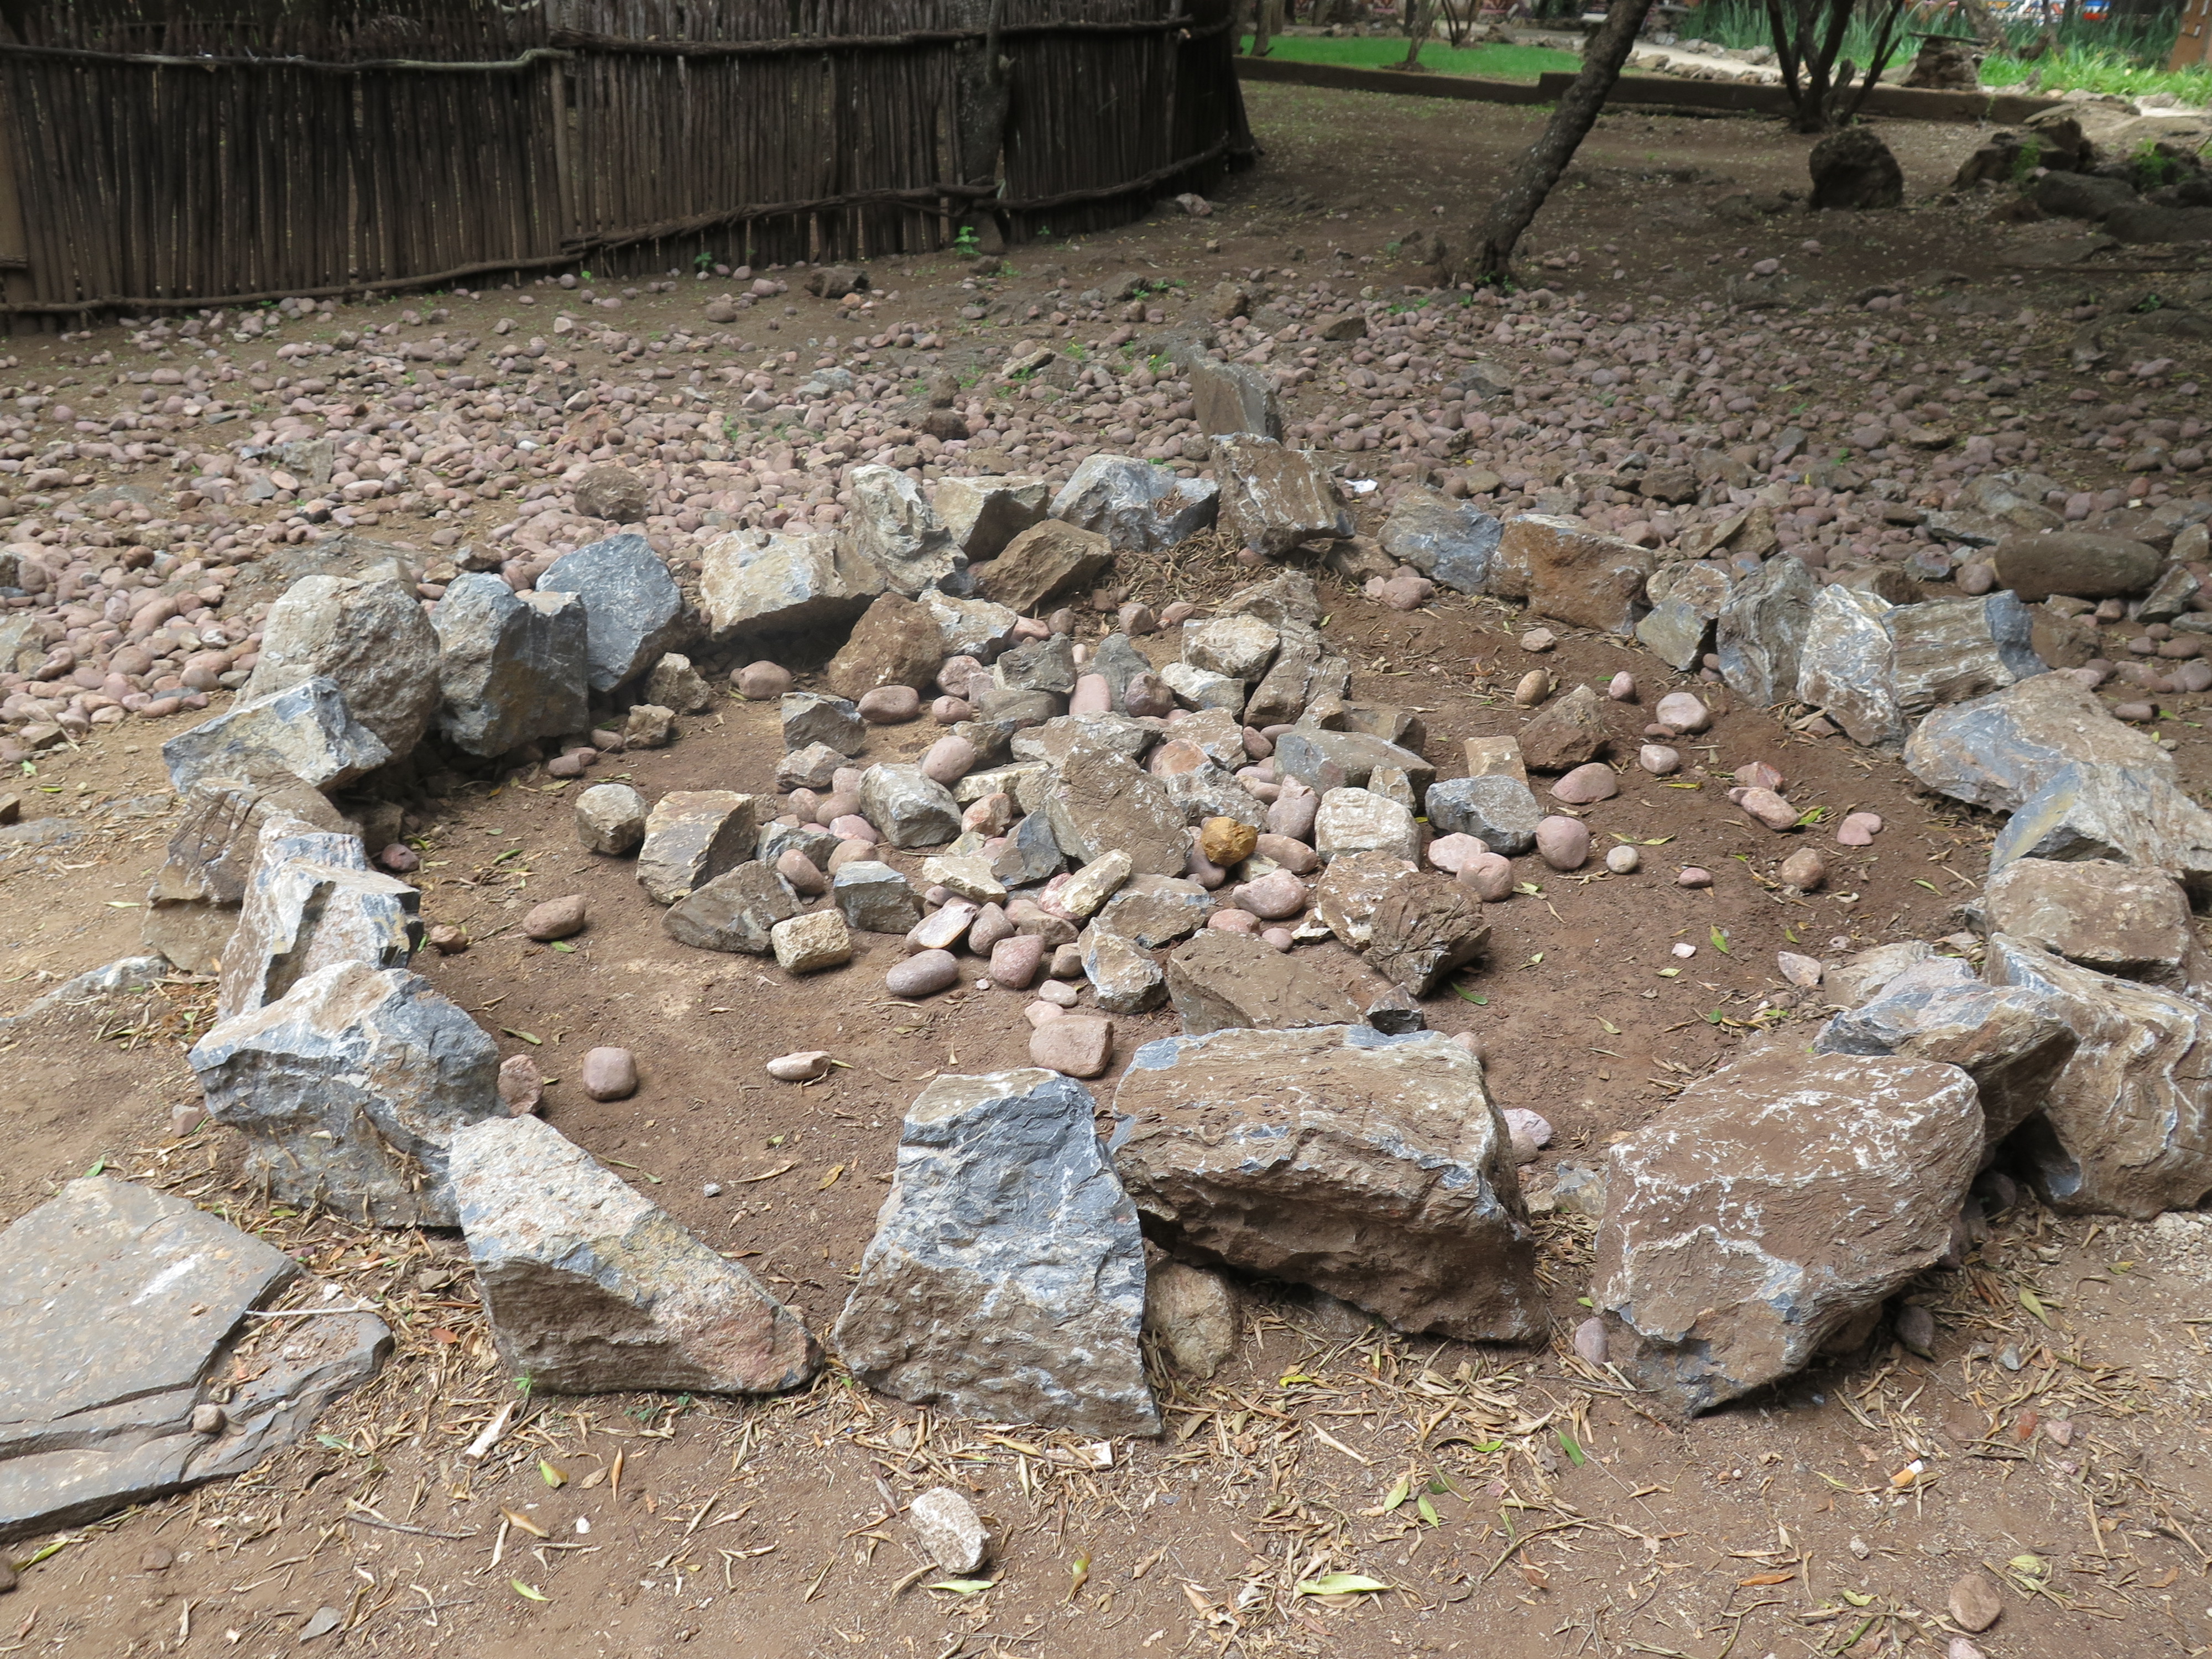 Zulu stone circle to appease the spirits